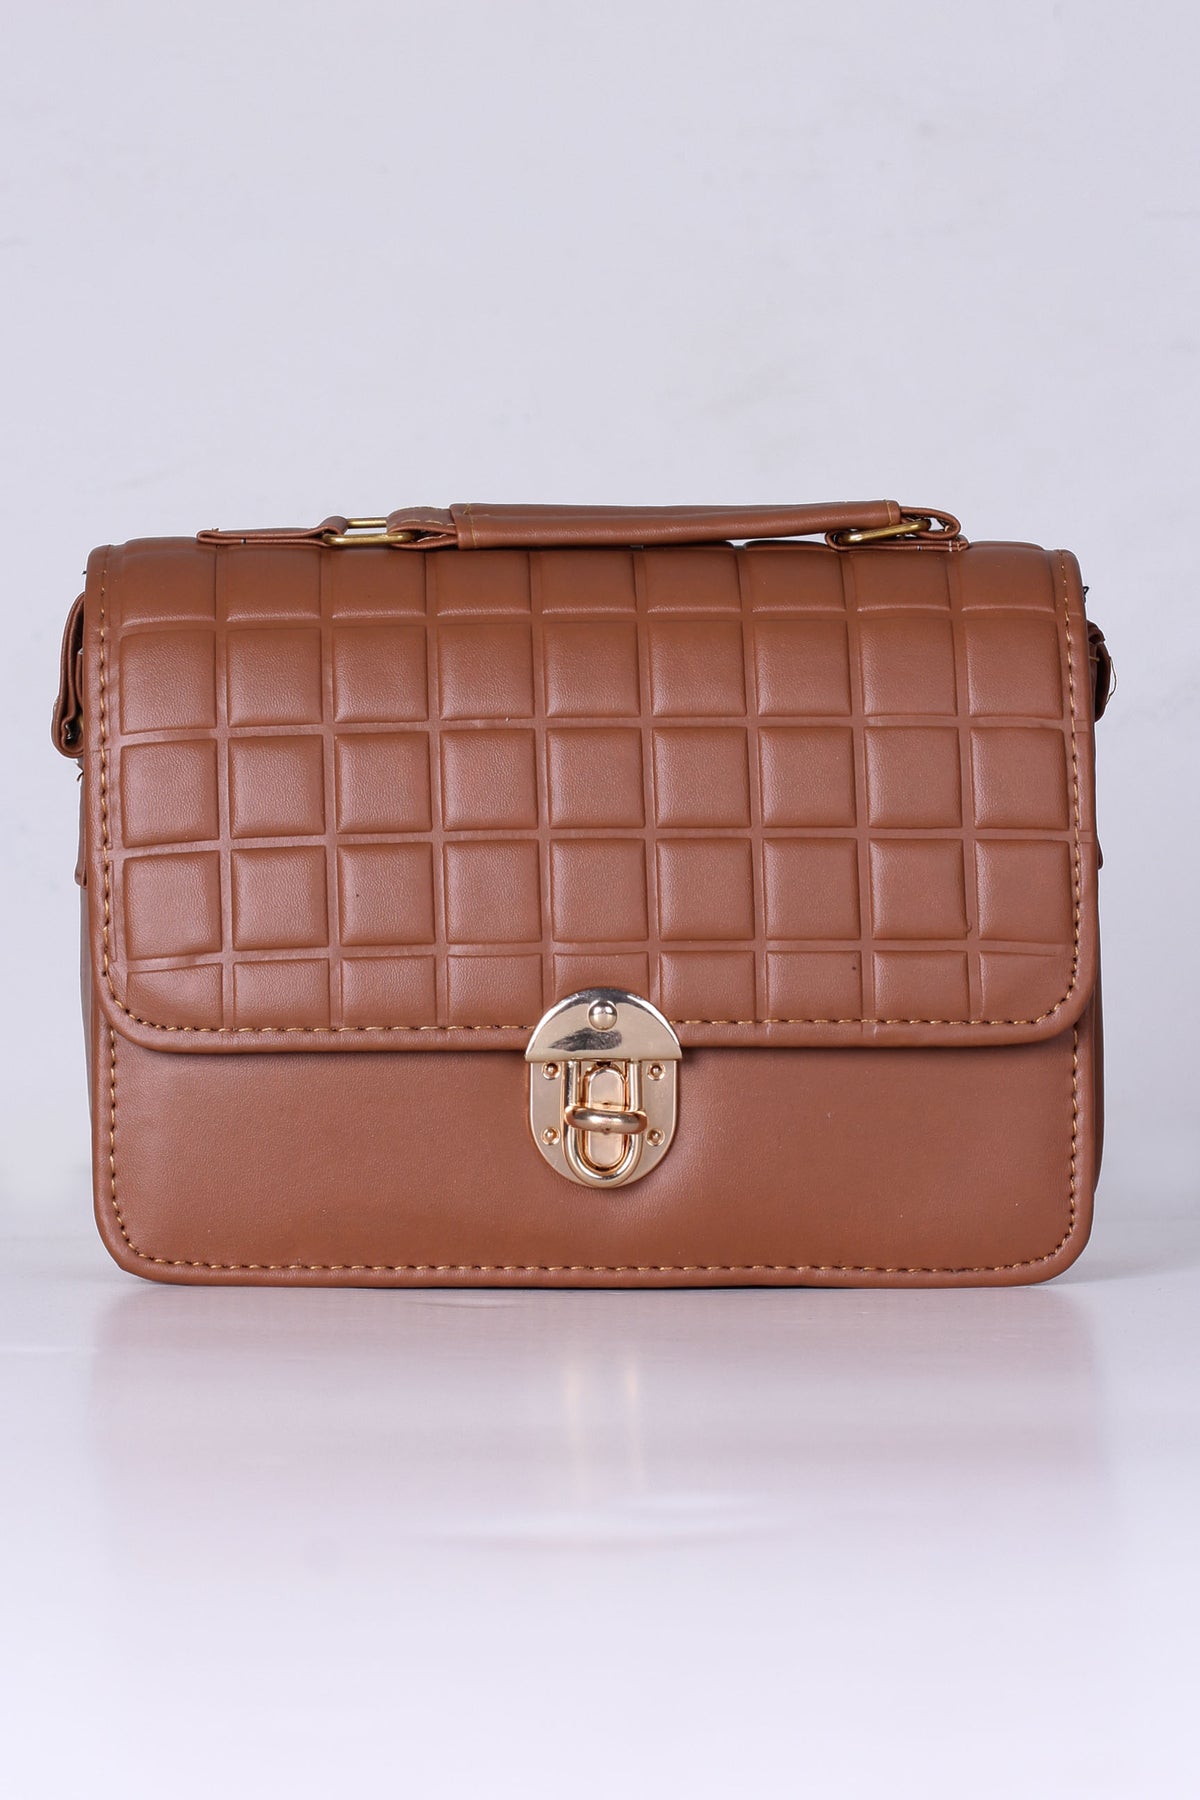 Hand Bags for Women |Ladies Purse L-Brown A43-108